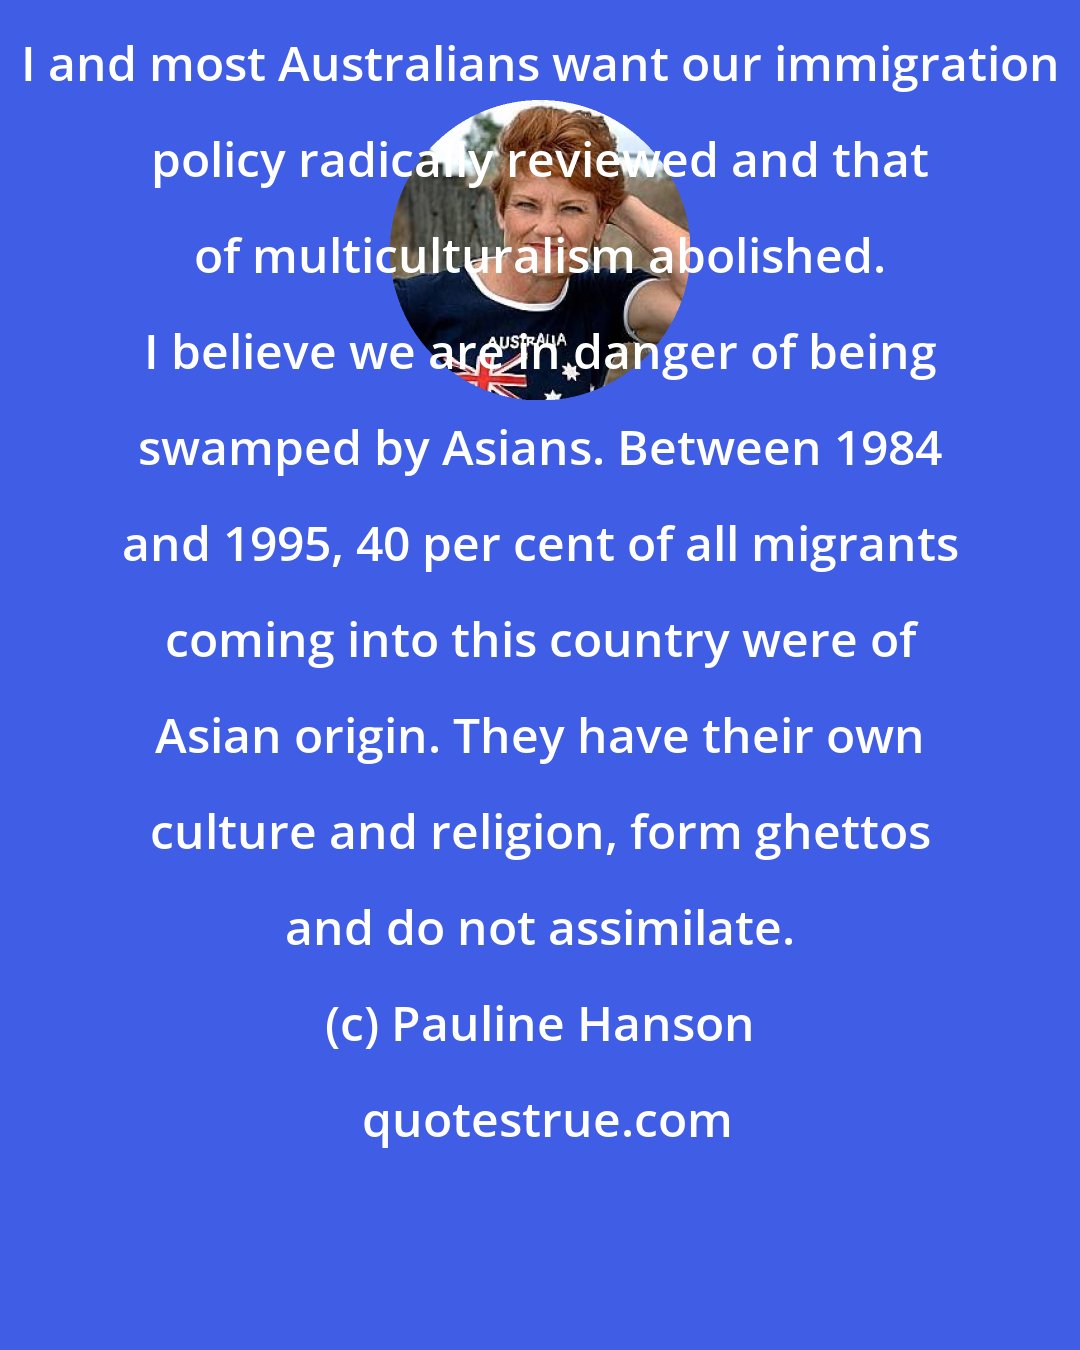 Pauline Hanson: I and most Australians want our immigration policy radically reviewed and that of multiculturalism abolished. I believe we are in danger of being swamped by Asians. Between 1984 and 1995, 40 per cent of all migrants coming into this country were of Asian origin. They have their own culture and religion, form ghettos and do not assimilate.